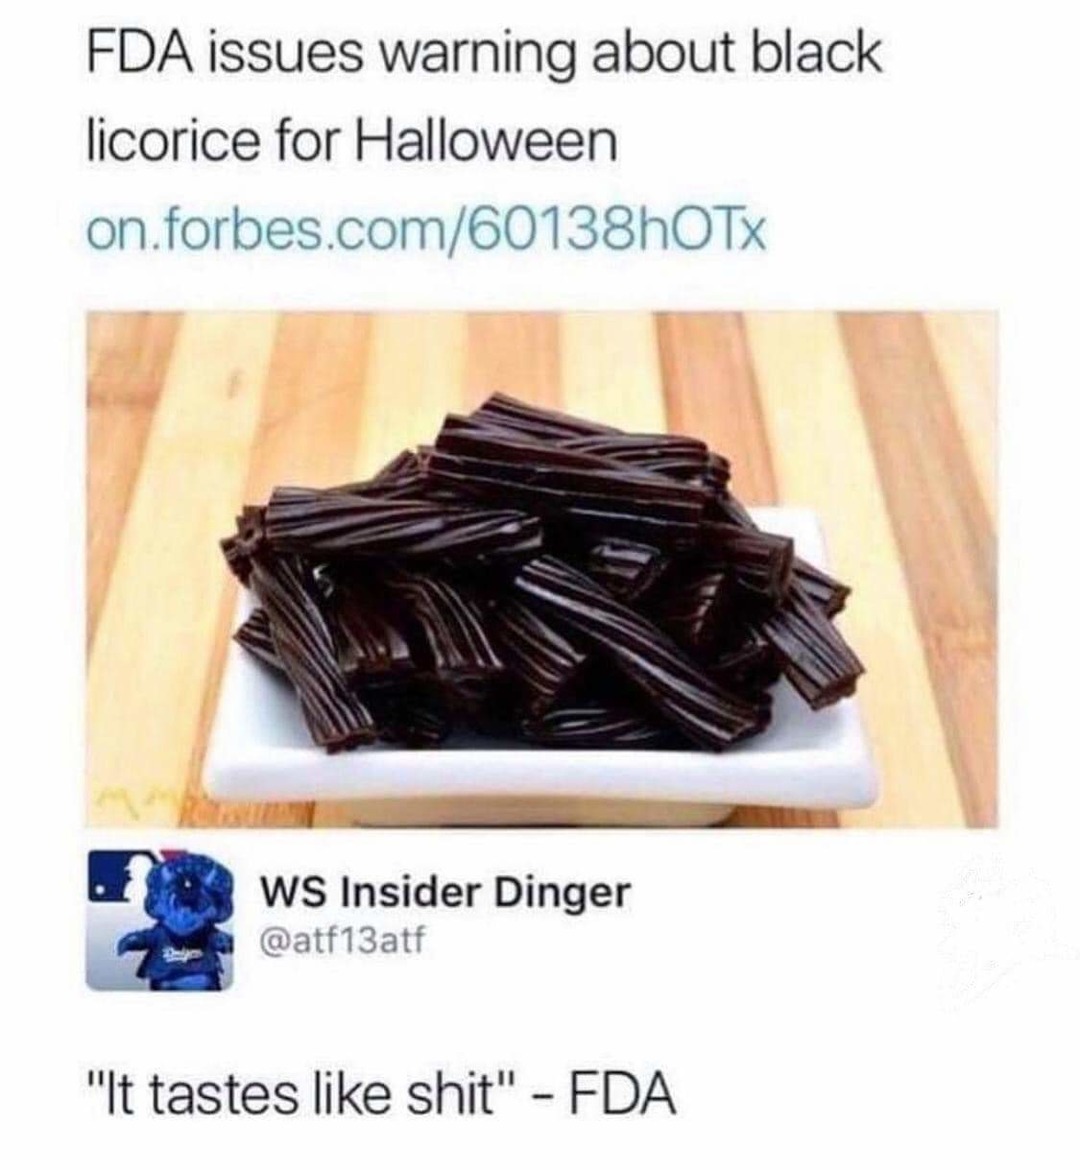 funny memes - fun randoms - fda black licorice - Fda issues warning about black licorice for Halloween on.forbes.com60138h0Tx Ws Insider Dinger "It tastes shit" Fda